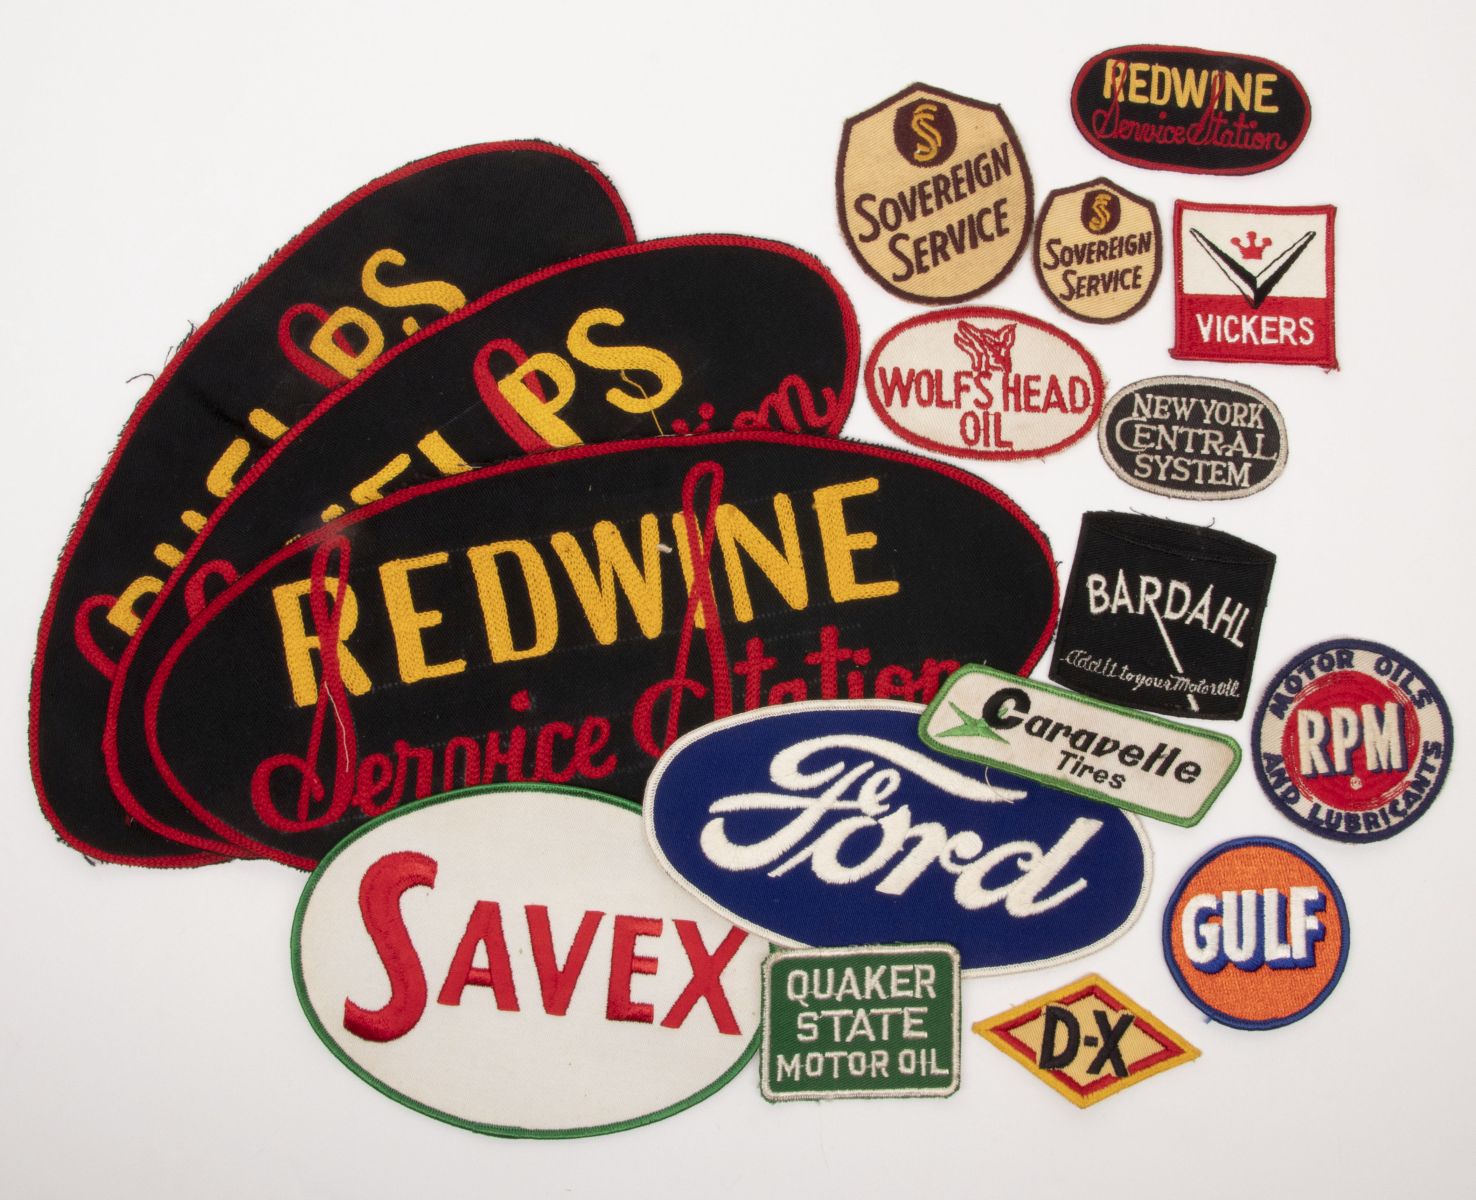 A COLLECTION OF GAS, OIL AND AUTO ADVERTISING PATCHES